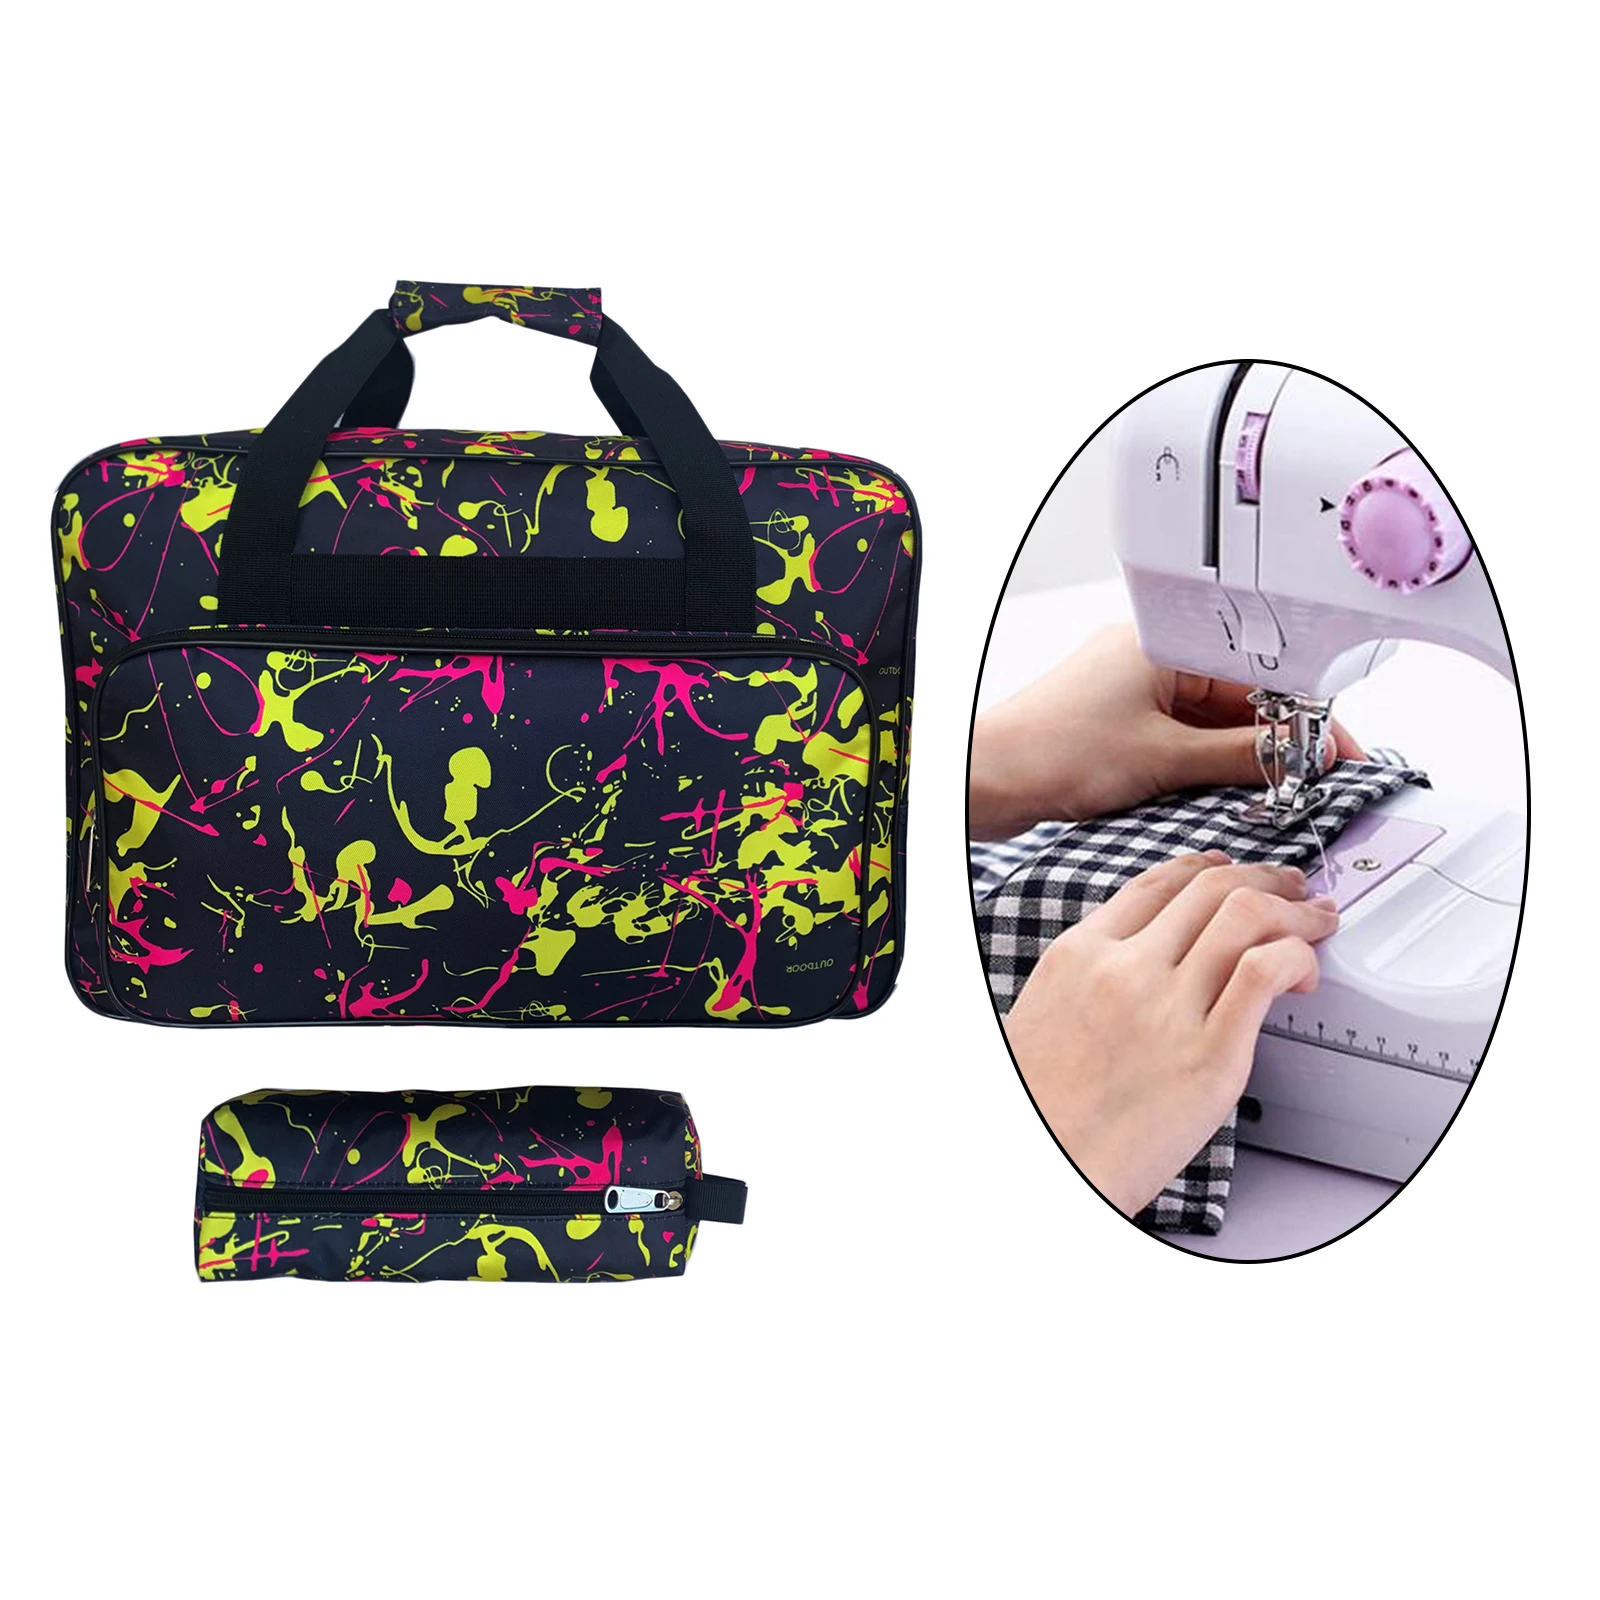 Sewing Machine Carry Bag Sewer Sew Machine Tote Universal Pockets Carrier